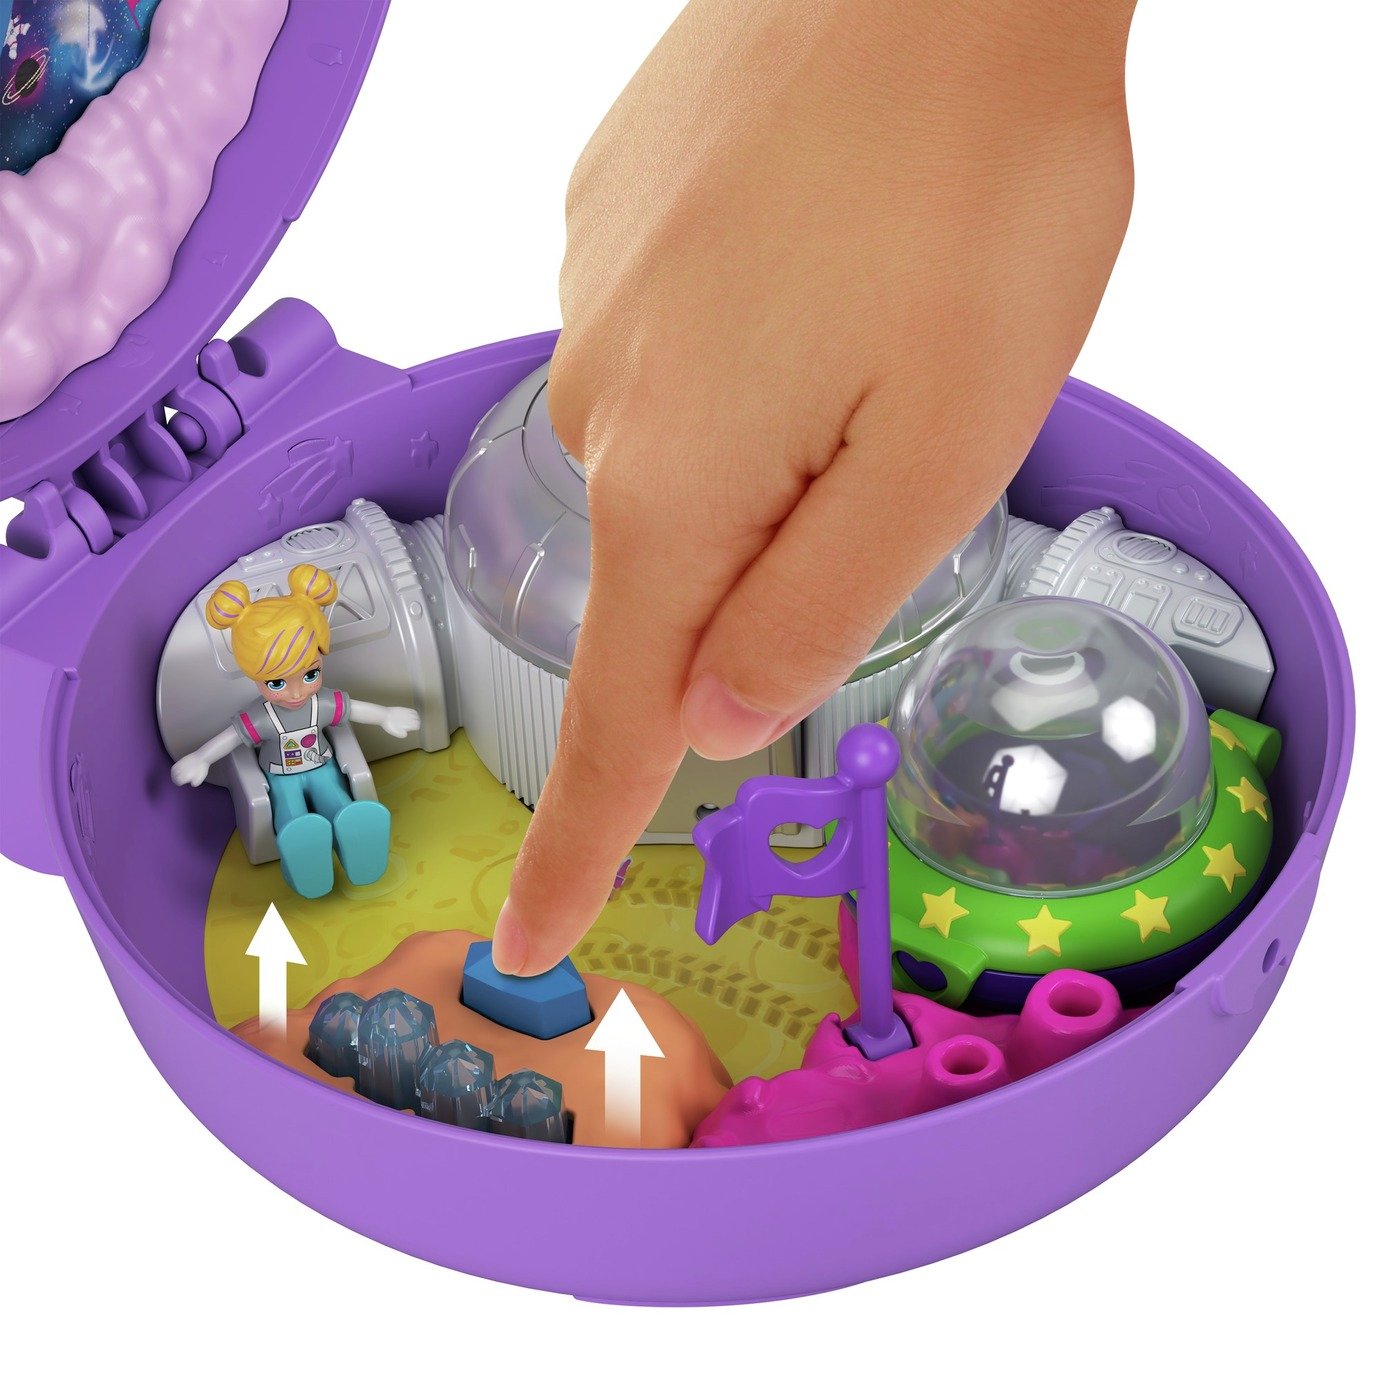 Polly Pocket Pocket World Saturn Space Compact Review